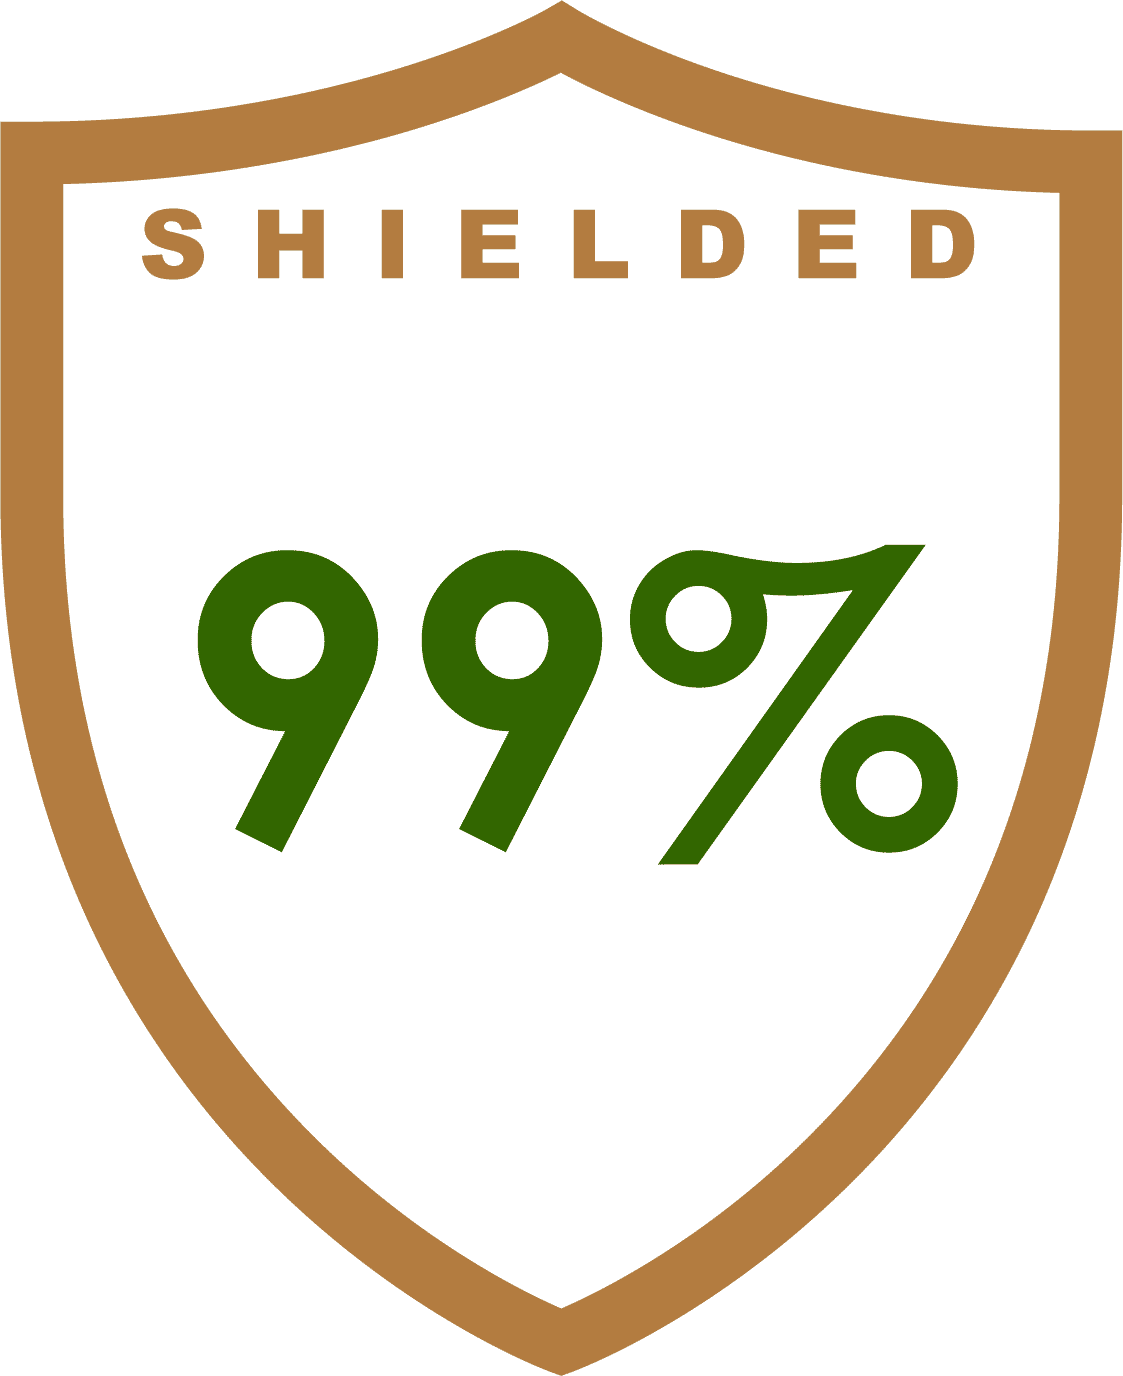 99% Shielded - gold